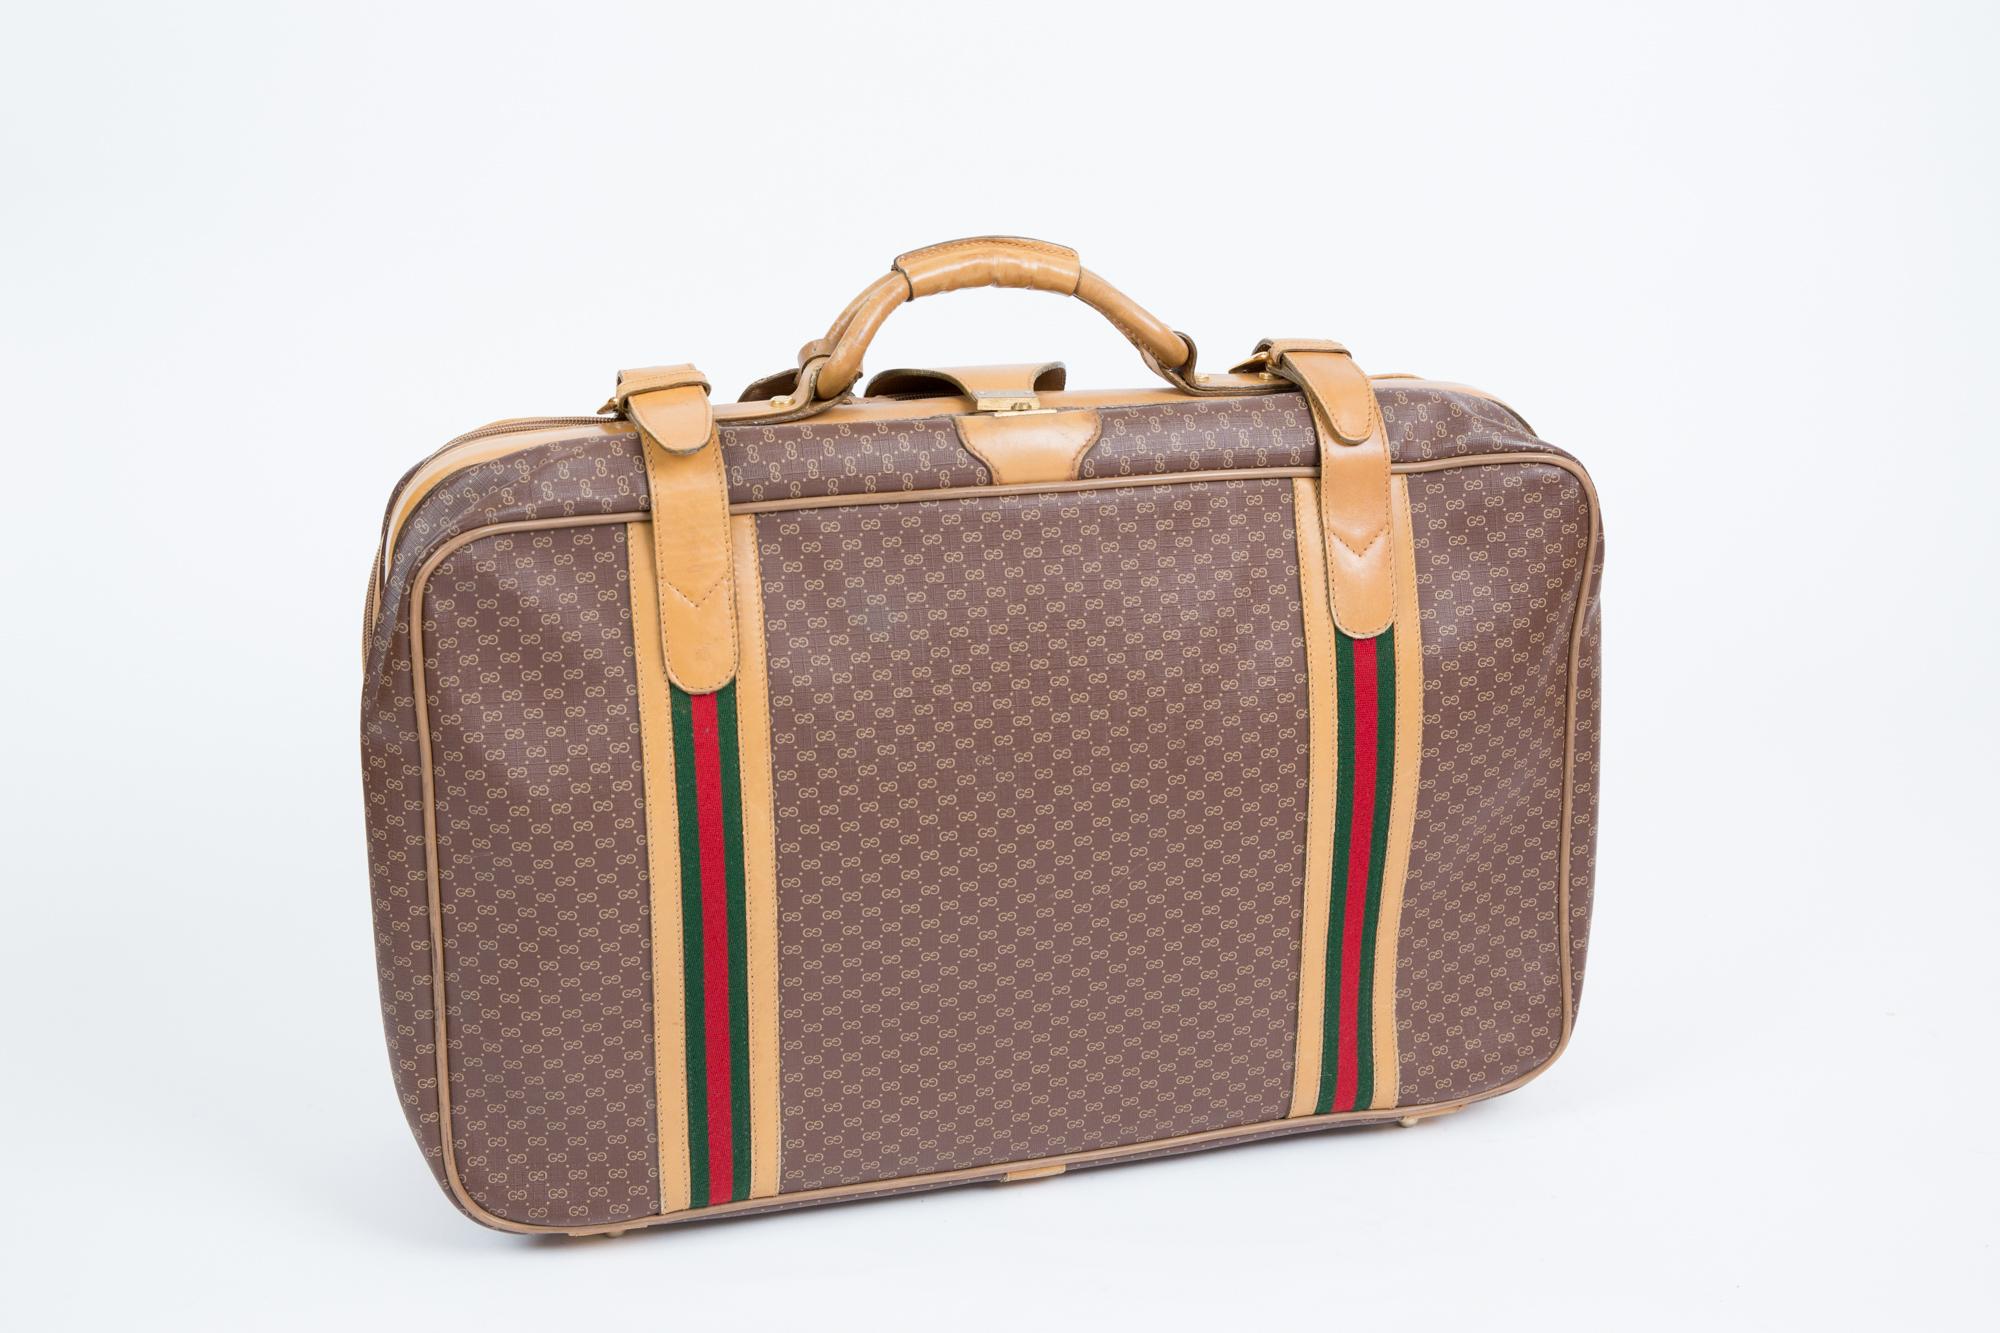 Gucci coffee- brown GG Supreme coated canvas travel suitcase featuring  top rounded camel leather handle, suitcase trimmed with the House the green and red Web stripe, round top handle, camel leather trims, two chunky brass zippers and a camel